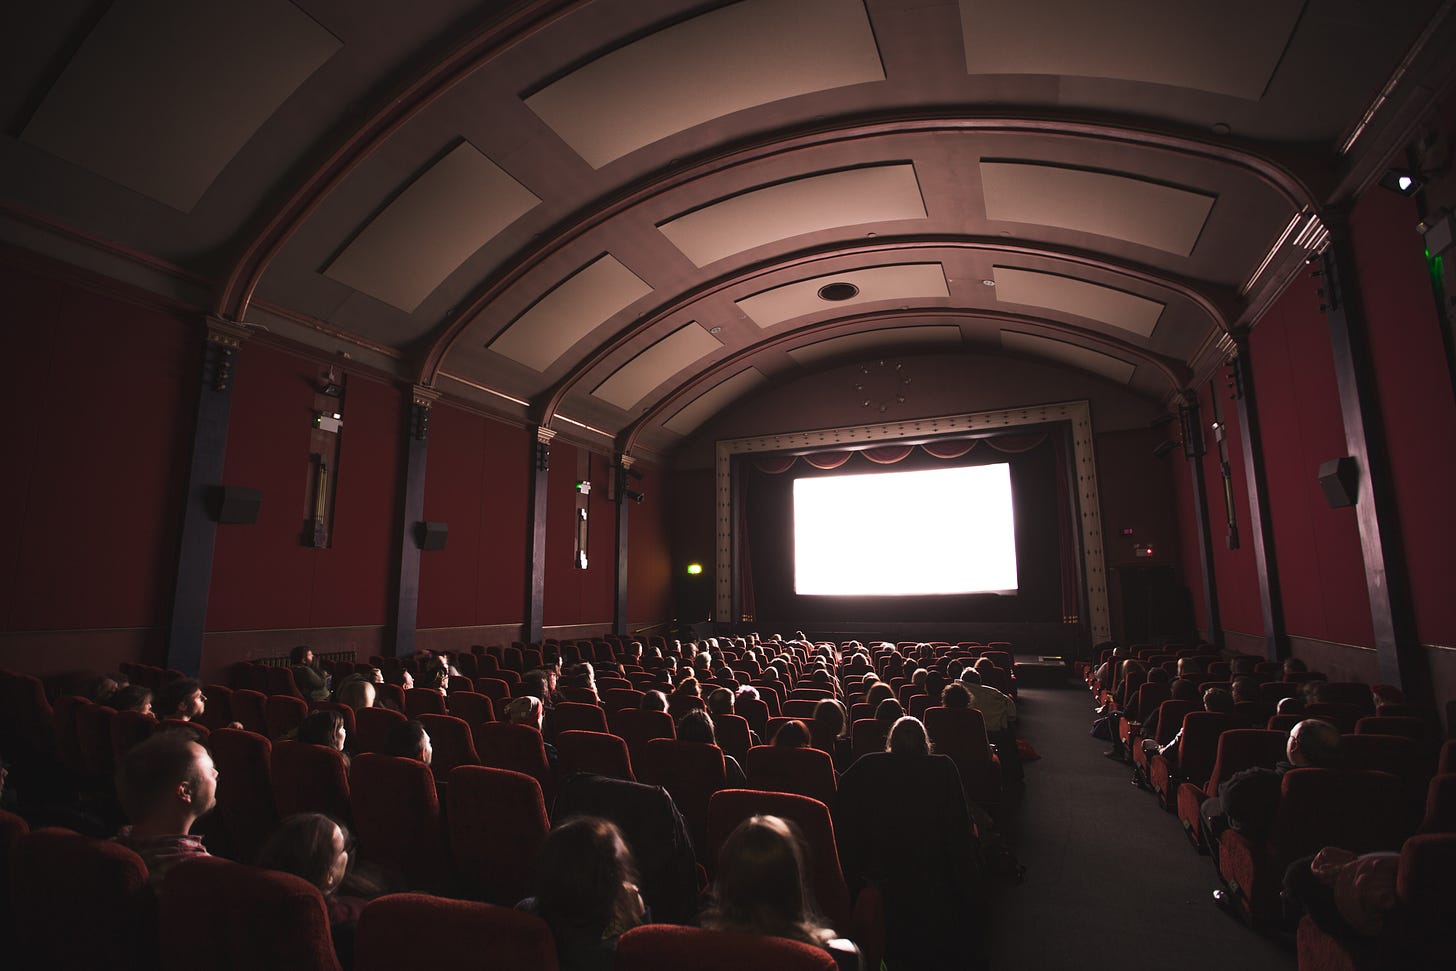 A movie theater mostly full of audience members staring at a blank, white screen. The ceiling of the theater is arched with red velvet walls.